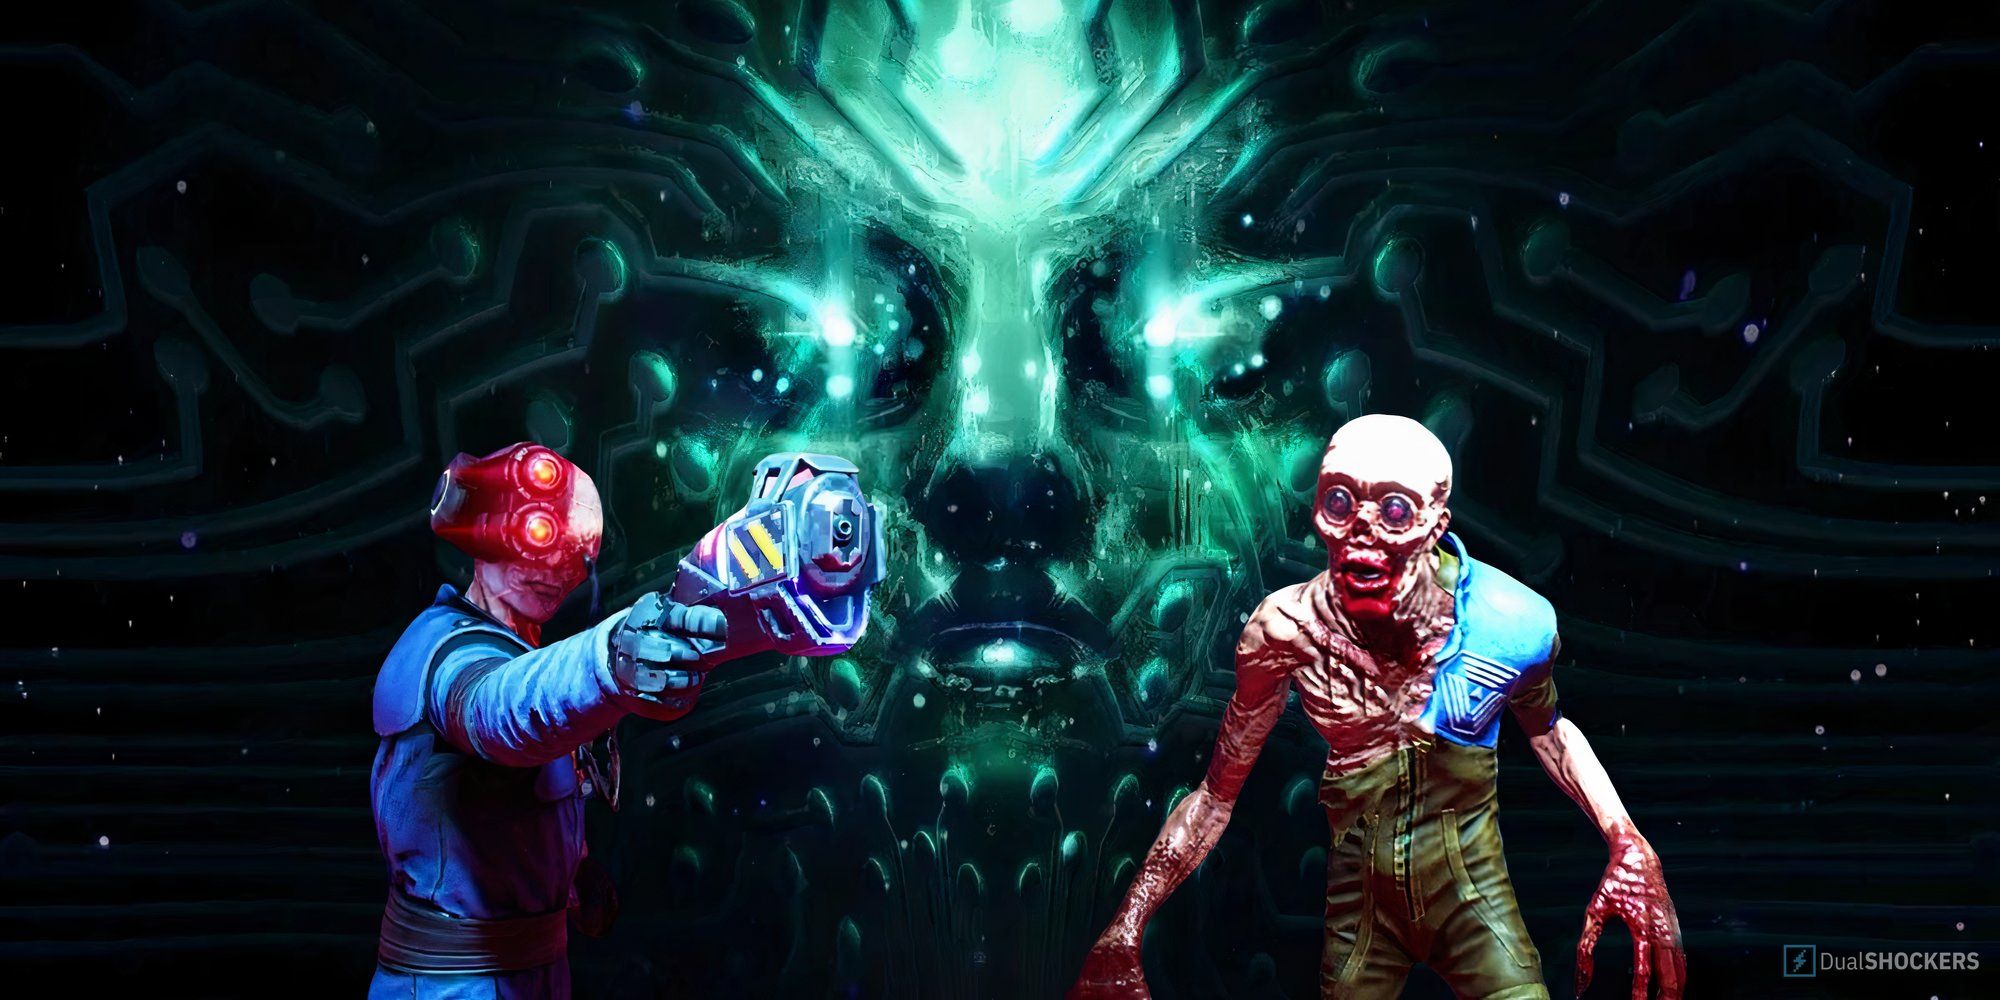 Promotional image from System Shock showing a green A.I. face with the protagonist and an alien on either side.